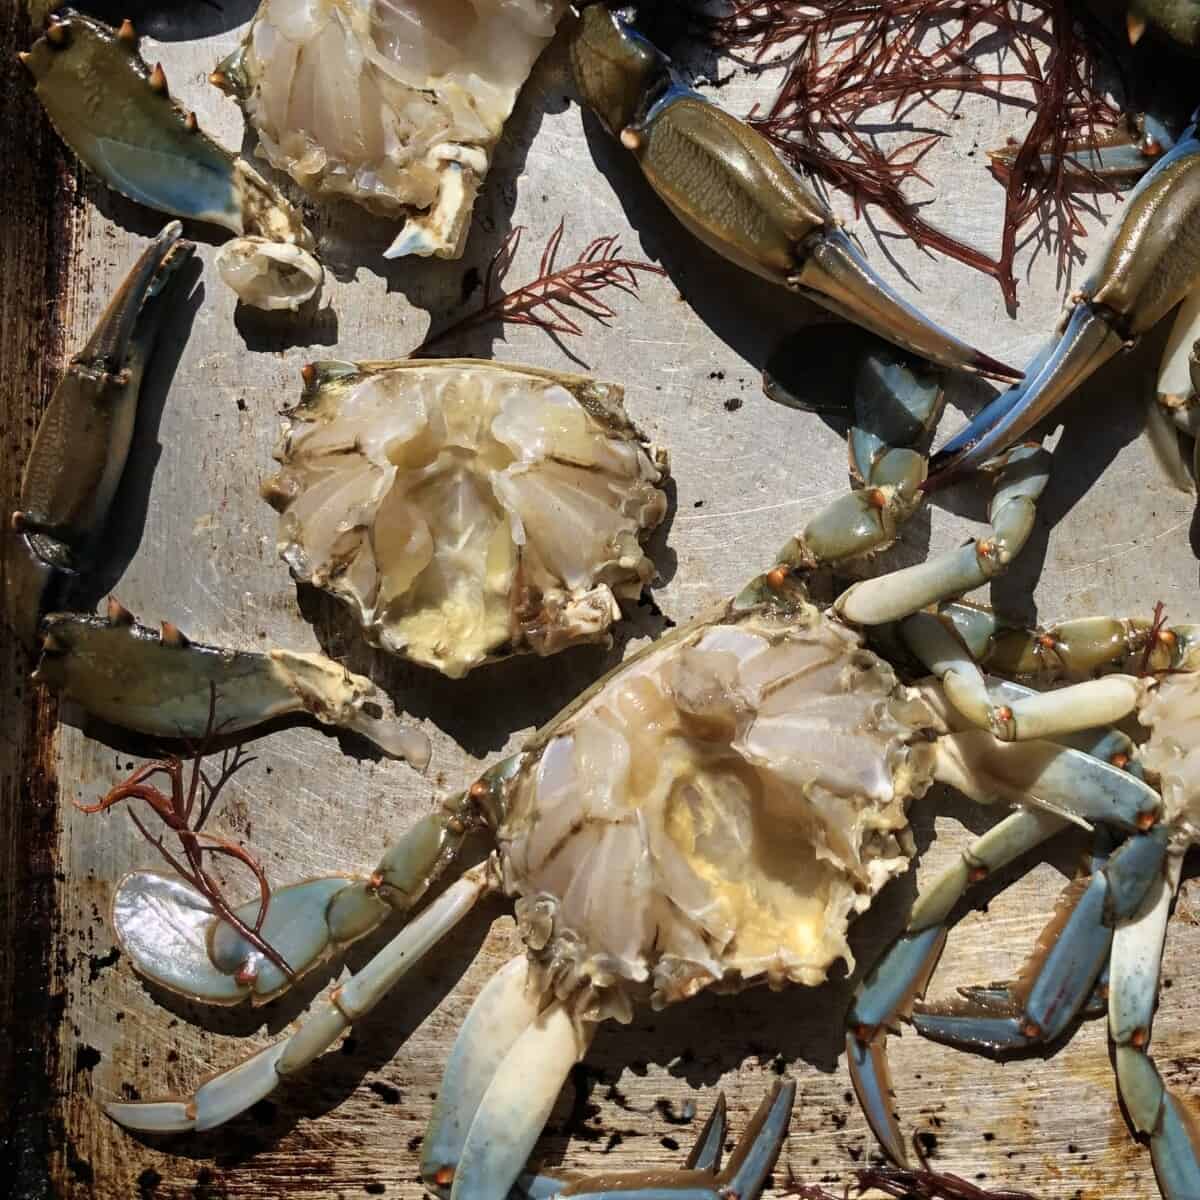 How to clean blue crabs for boiling.